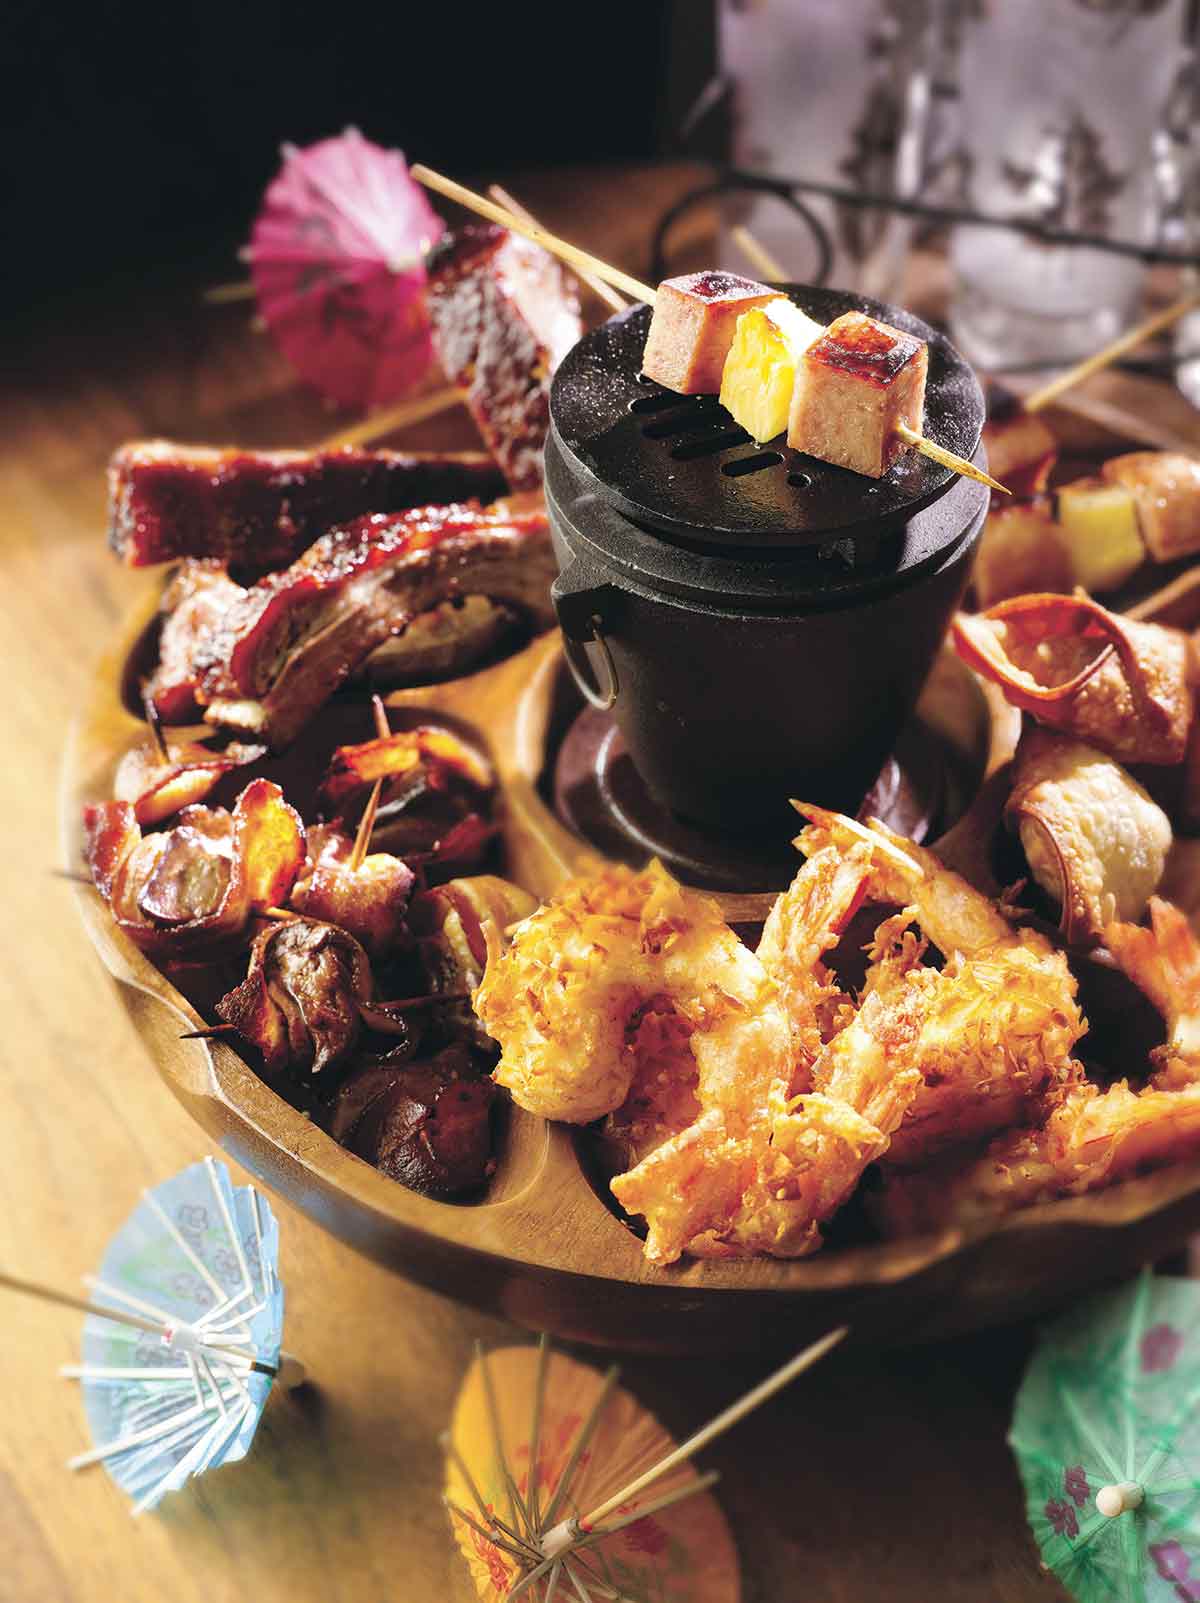 A wooden pupu platter filled with coconut shrimp, spam and pineapple skewers, and ribs.